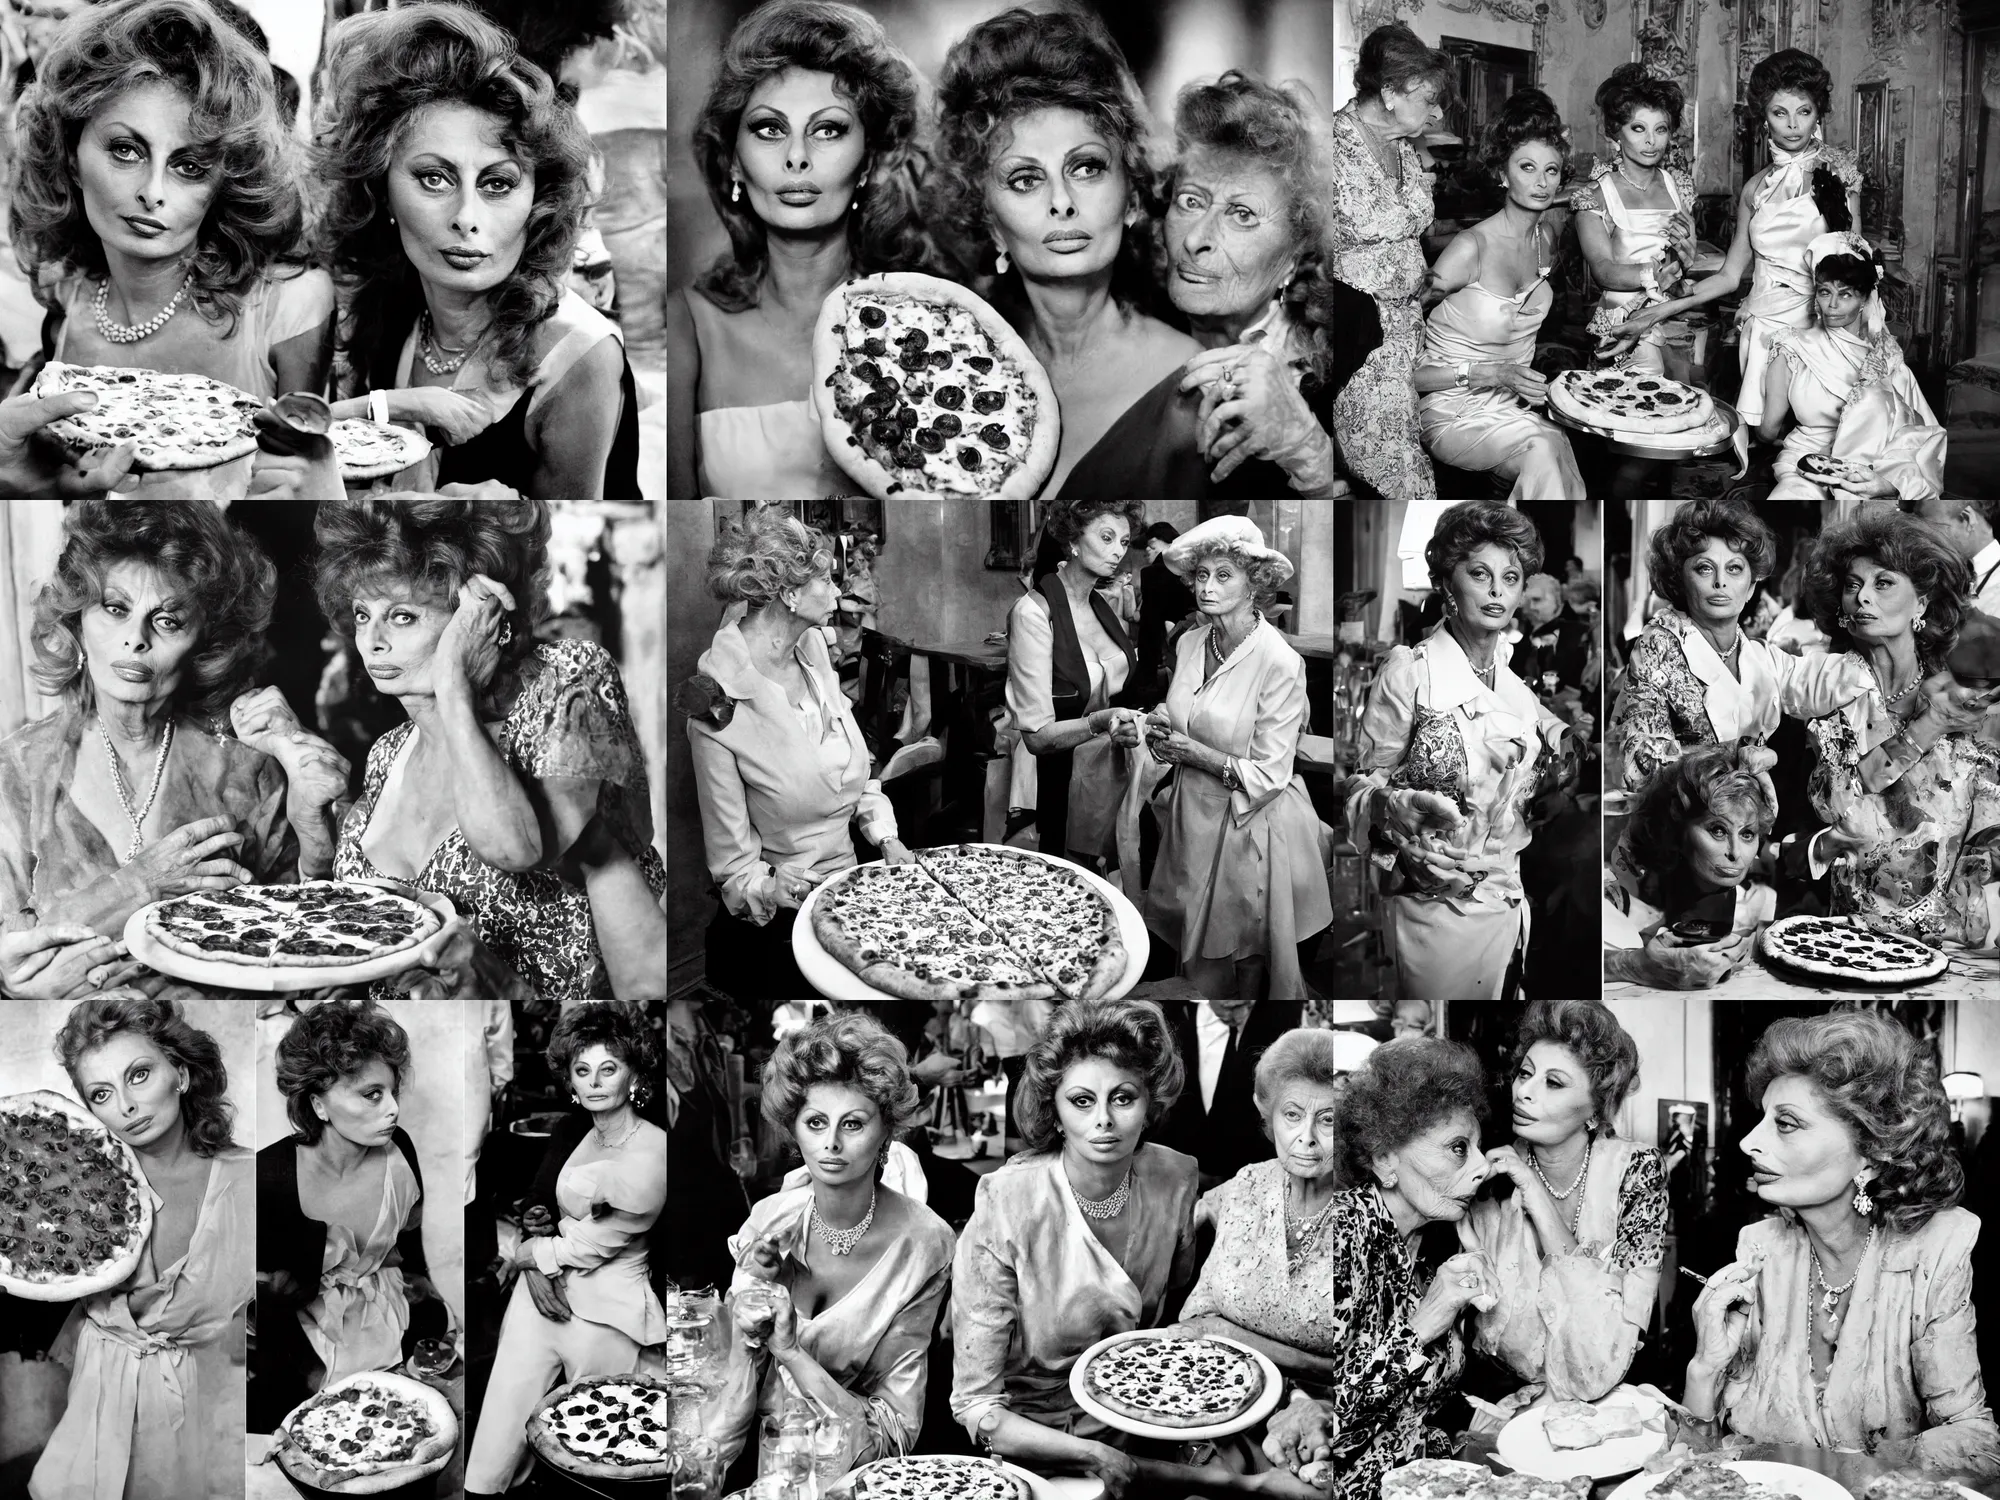 Prompt: posing with a pizza margherita, young poor sophia loren meets old royal queen margherita of savoy, contrasting lives, beautiful, stunning, smooth lighting, exquisit detail, masterpiece, timeless, rare historical photo by letizia battaglia